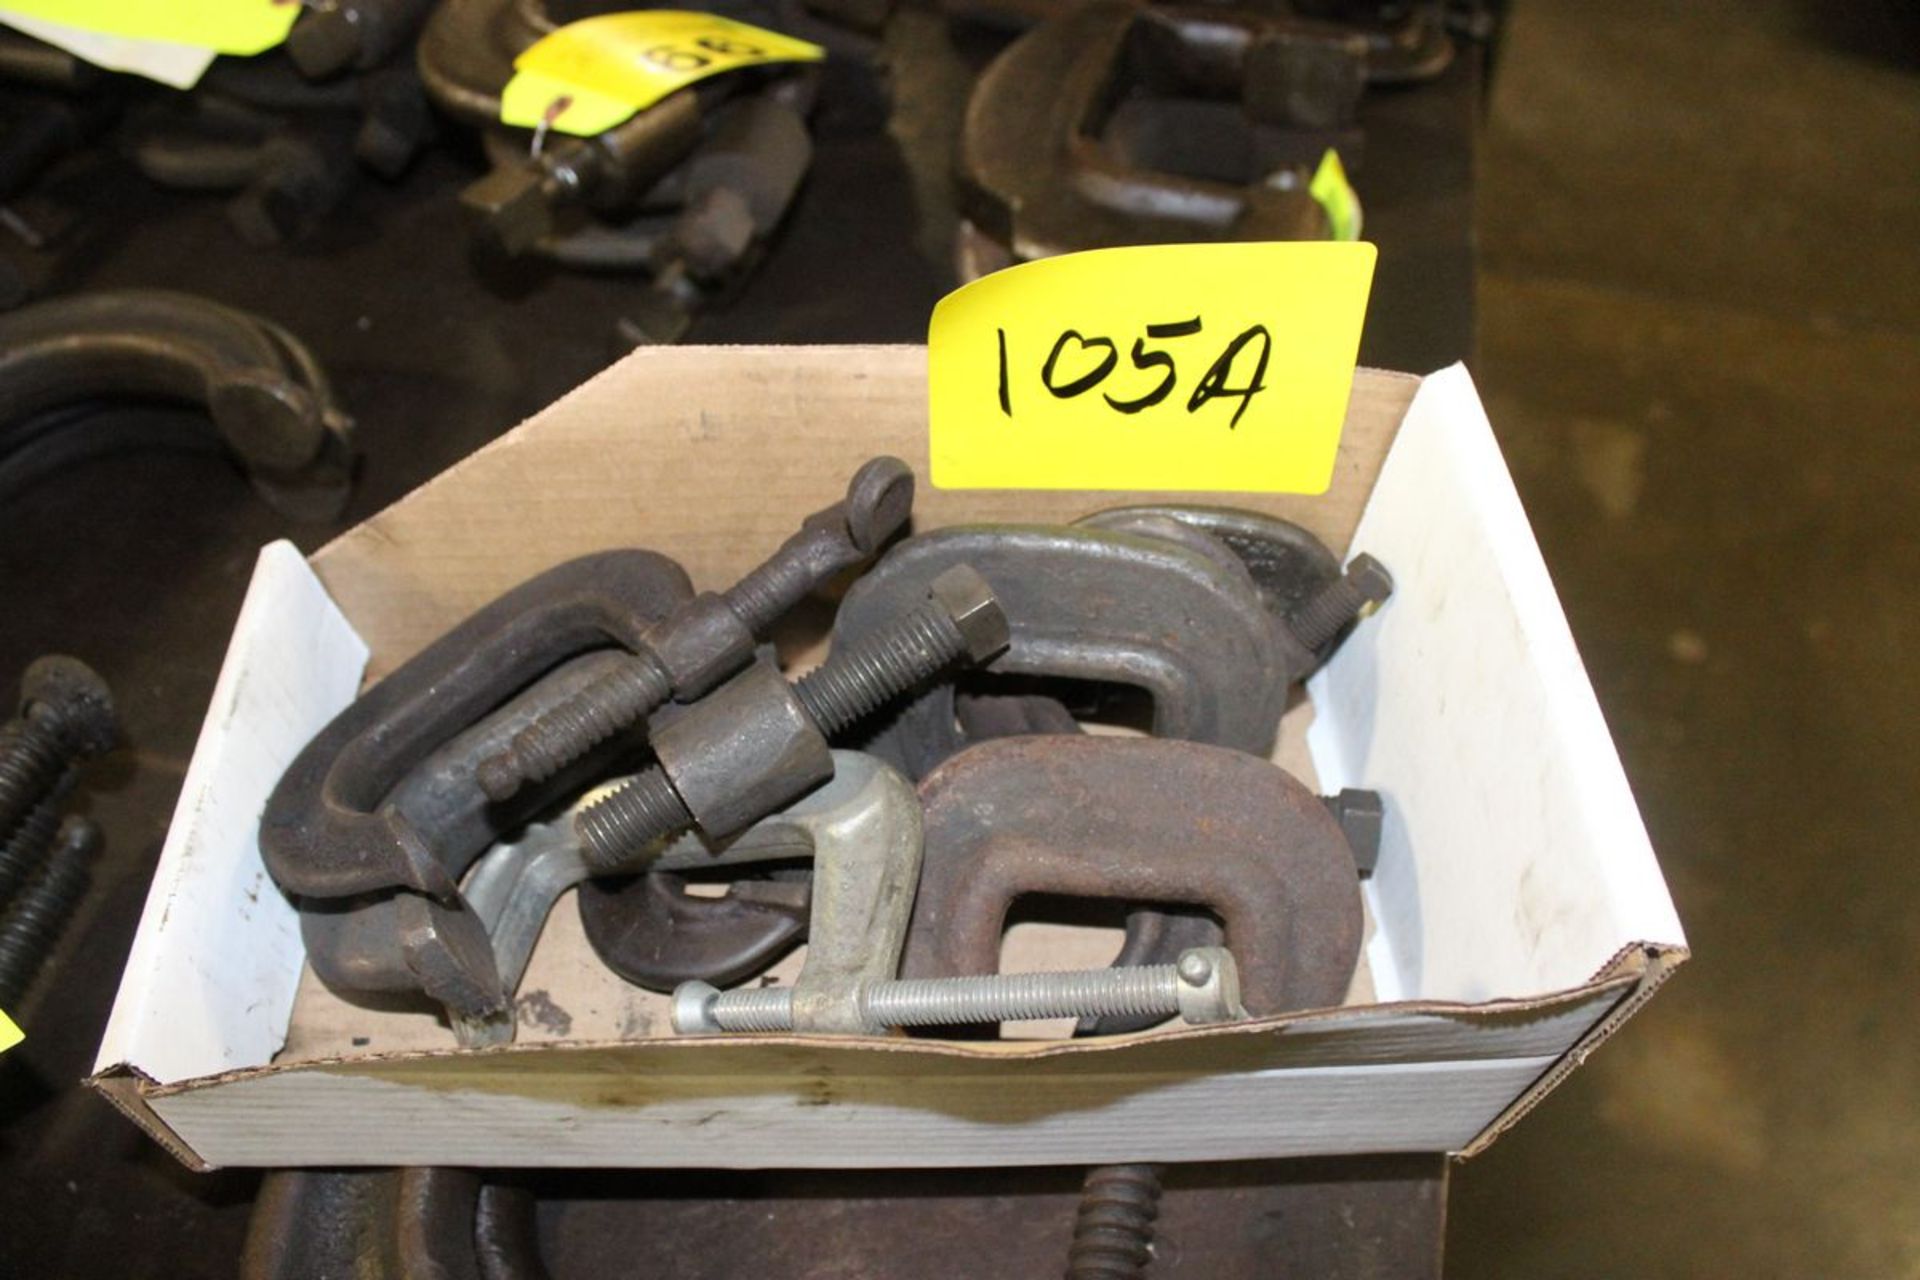 ASSORTED C-CLAMPS IN BOX